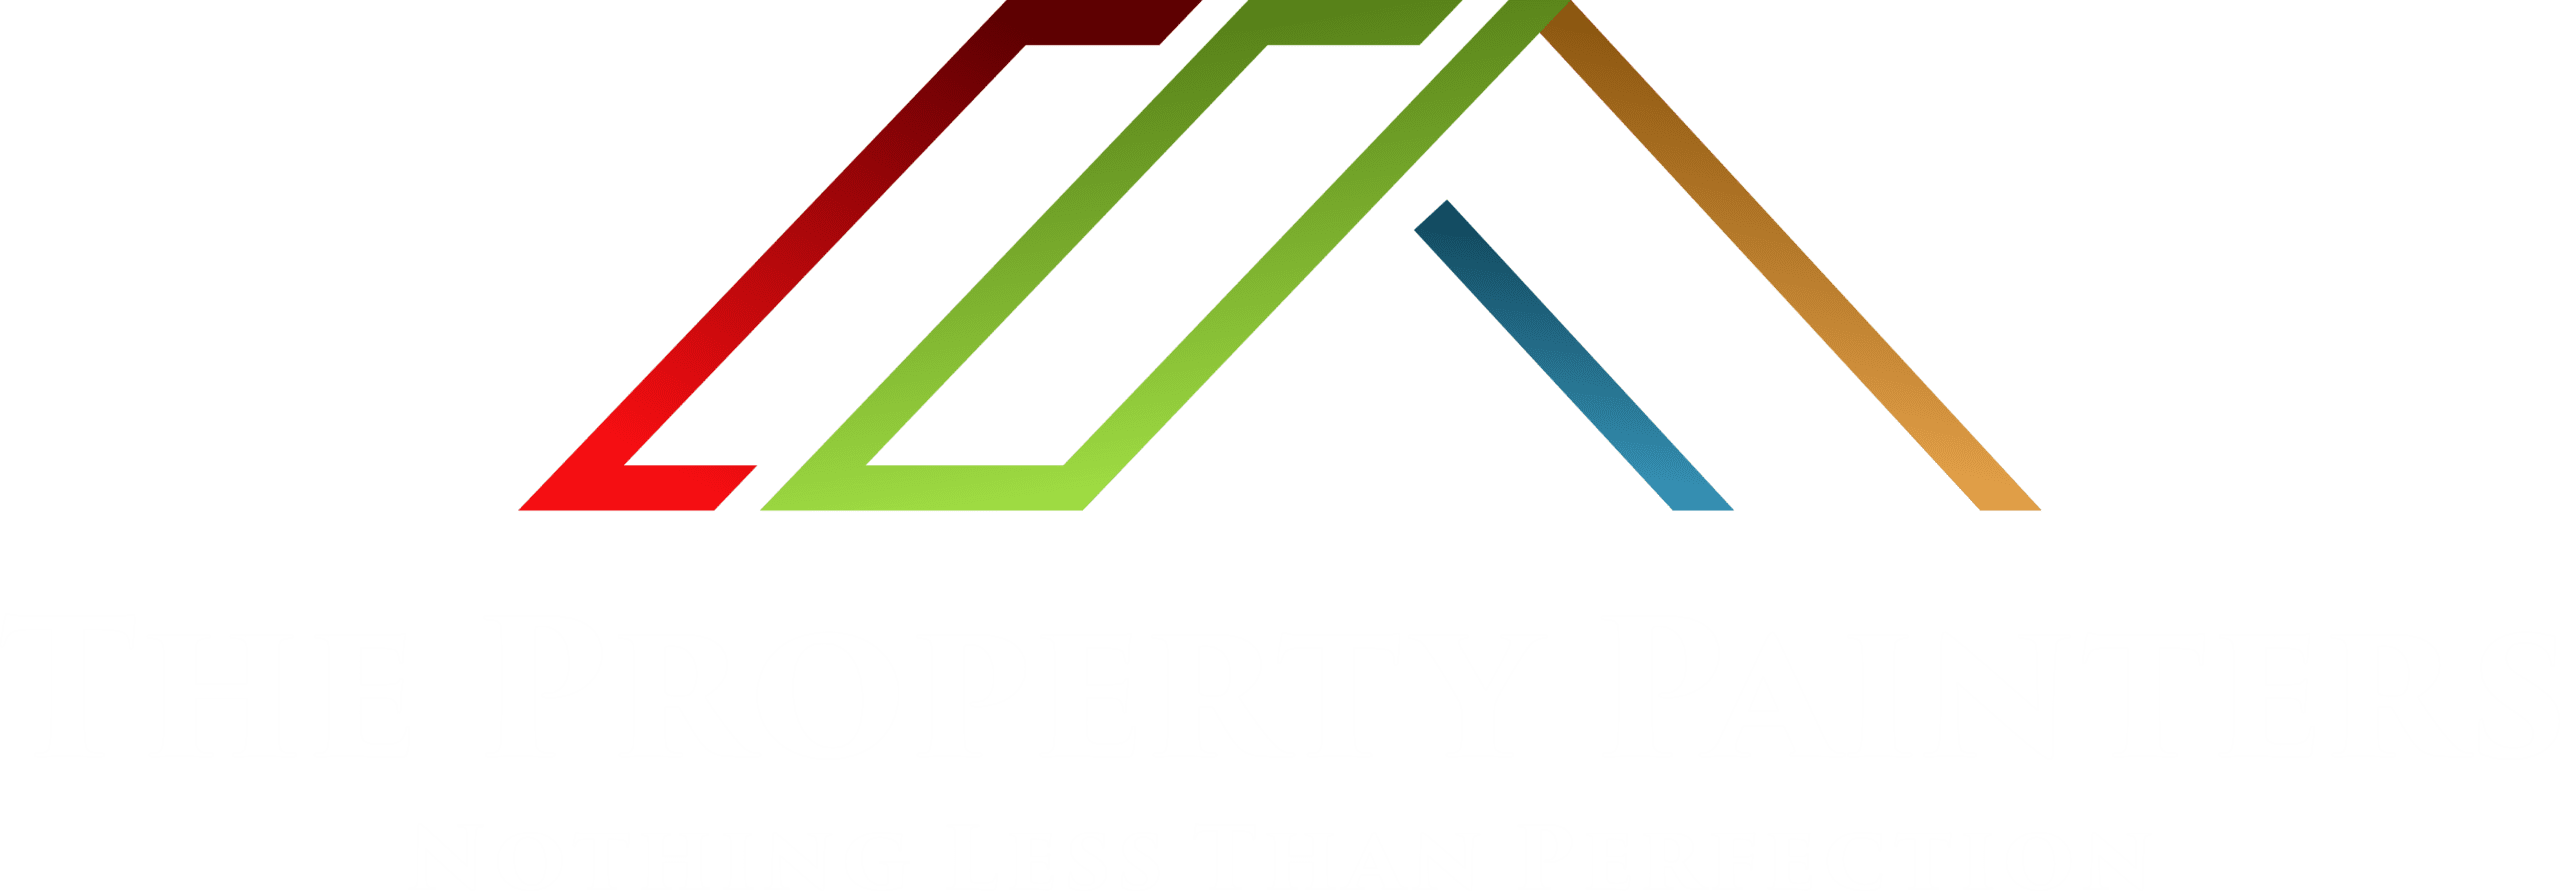 The Property Painters